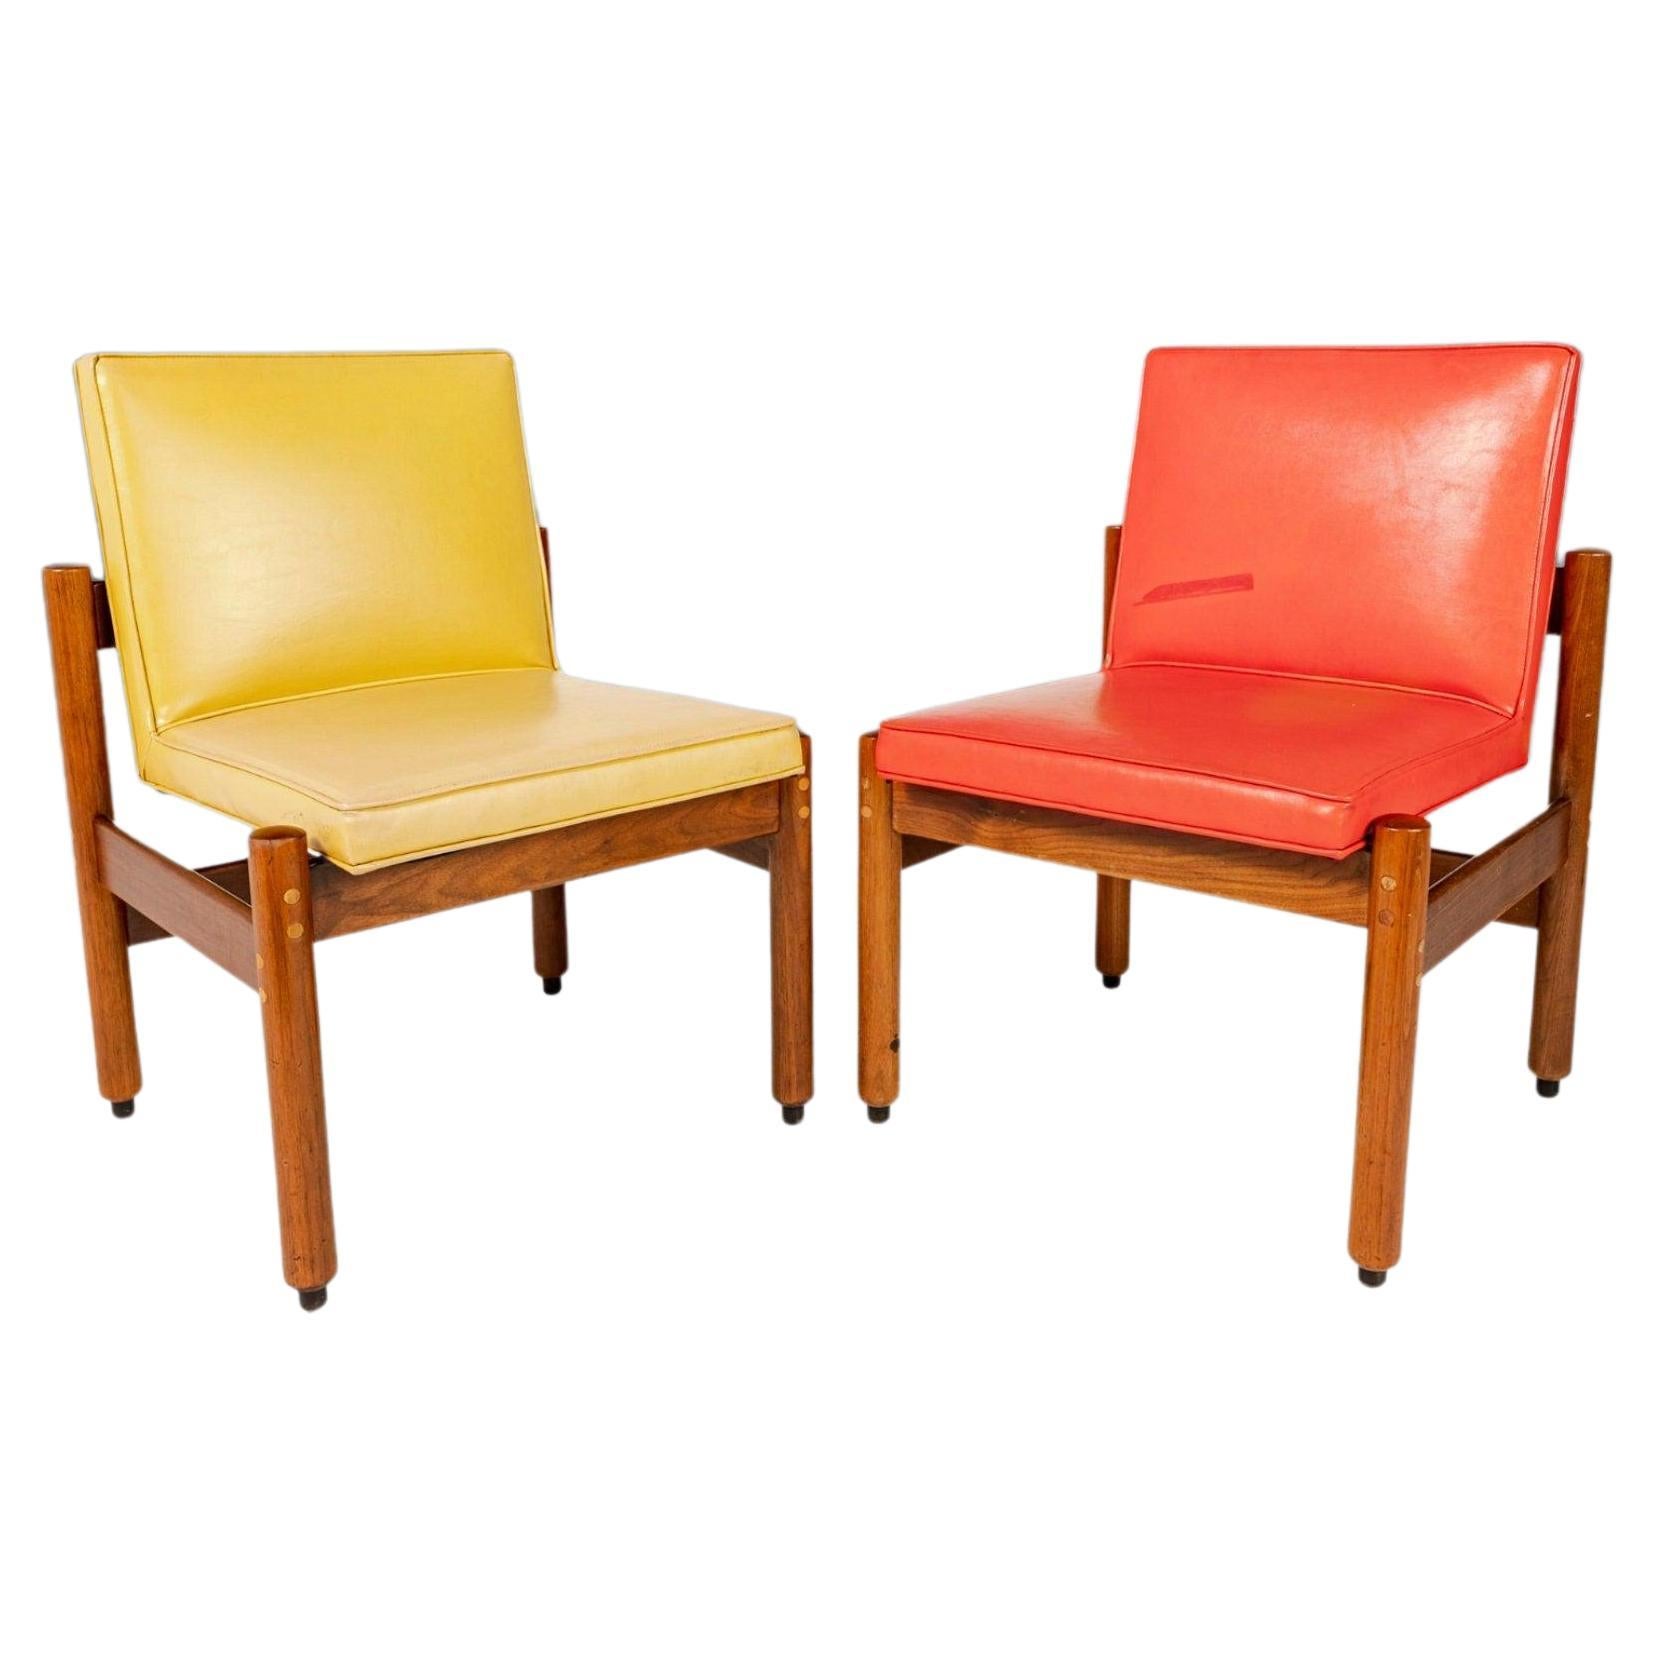 Set of Two '2' Thonet Armless Chairs in Original Upholstery, USA, c. 1960's